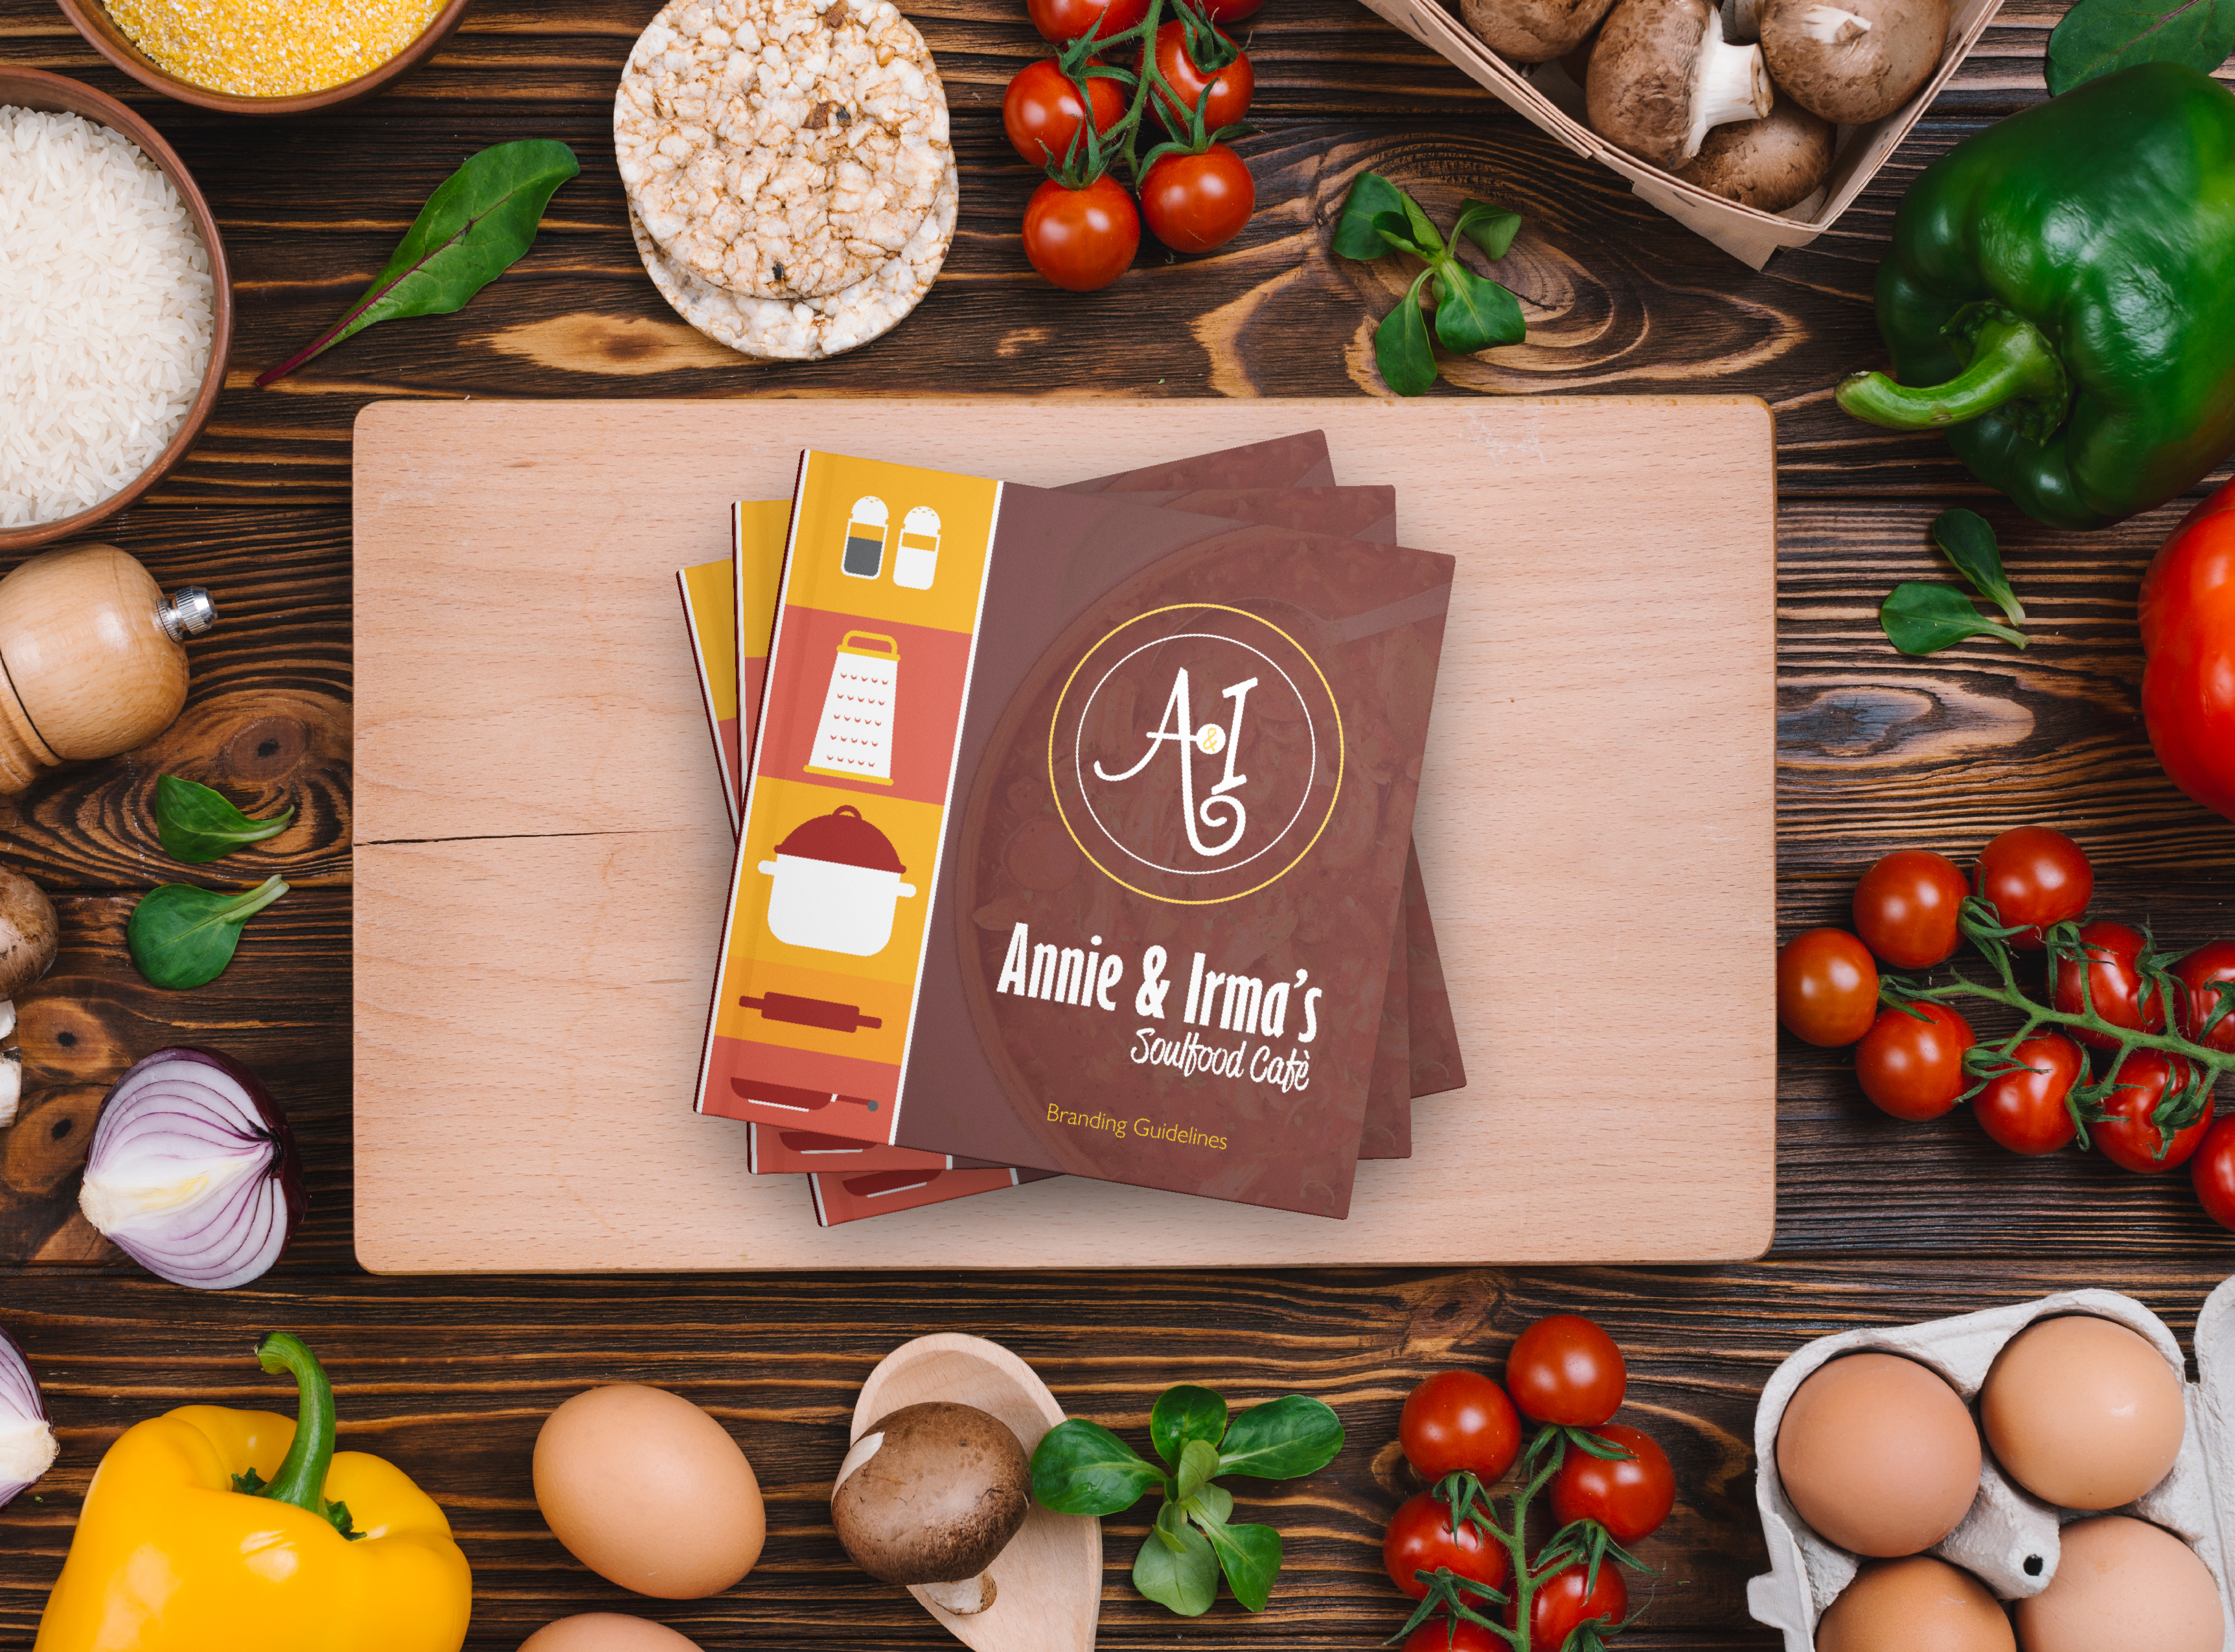 featured image:Annie & Irma's Soulfood Cafe' Brand Guidelines